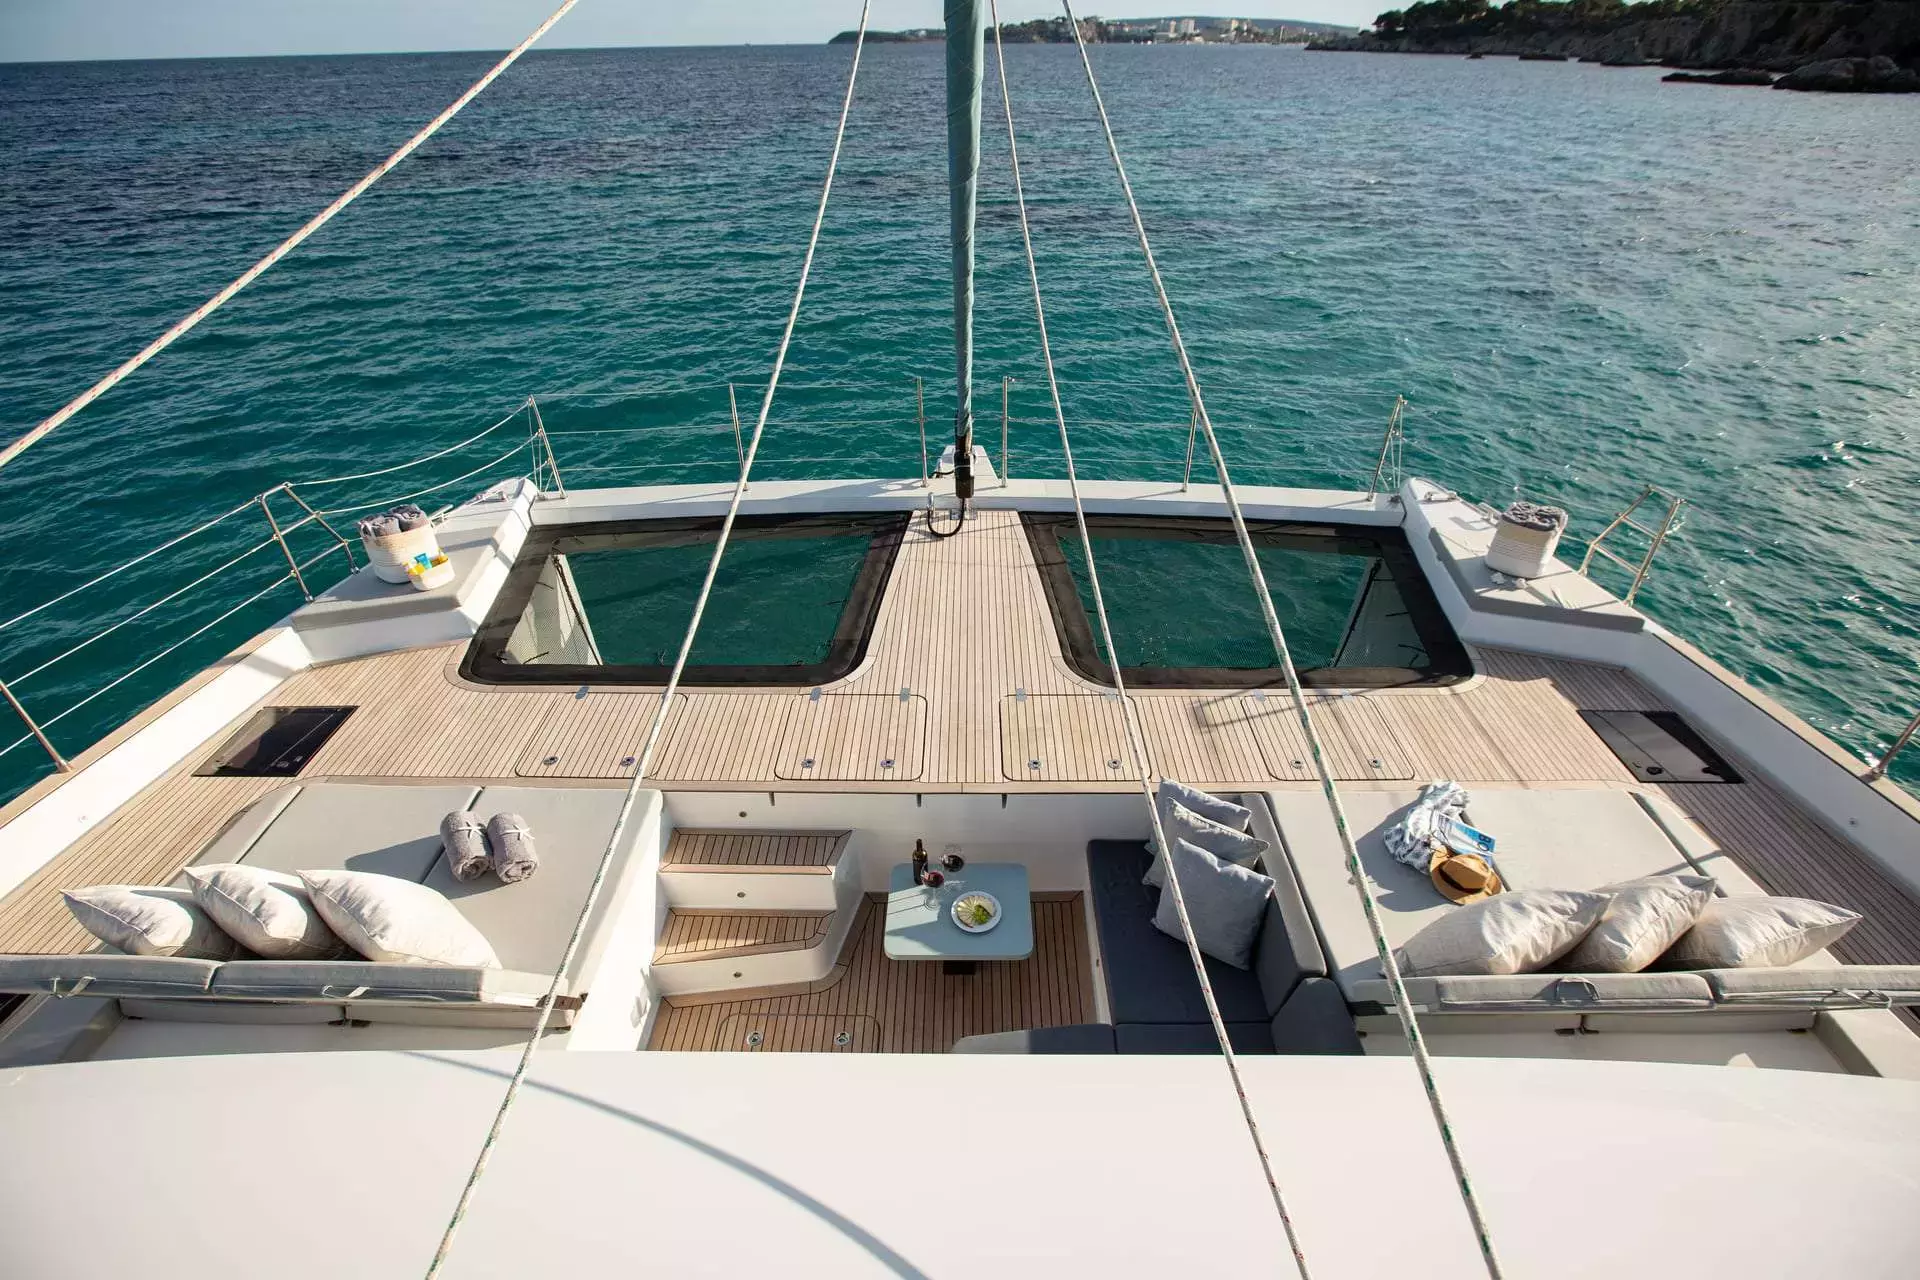 Sunbreeze by Sunreef Yachts - Special Offer for a private Sailing Catamaran Rental in Mallorca with a crew